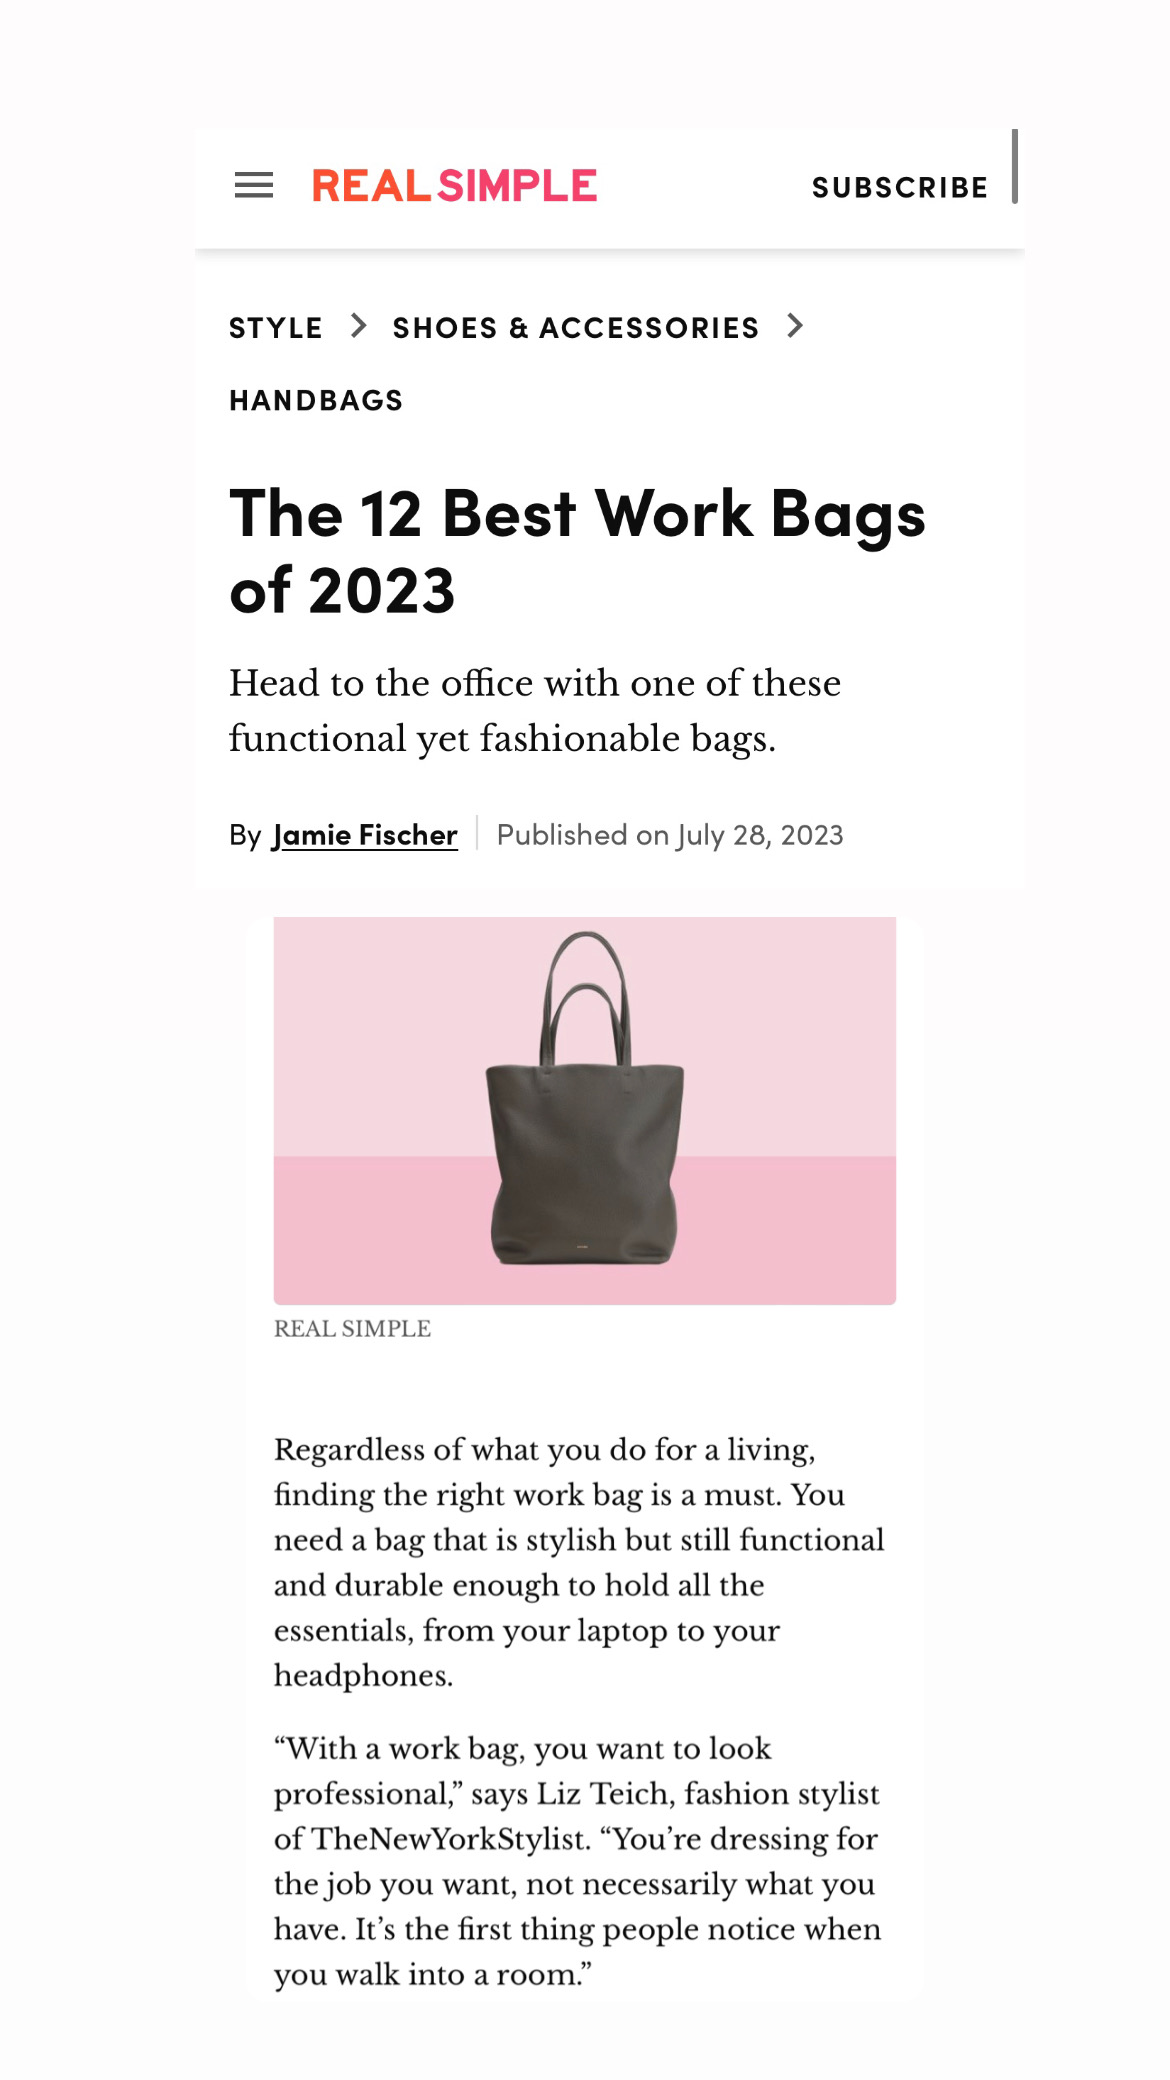 12 Celeb-Approved Handbags to Buy in 2022 - PureWow